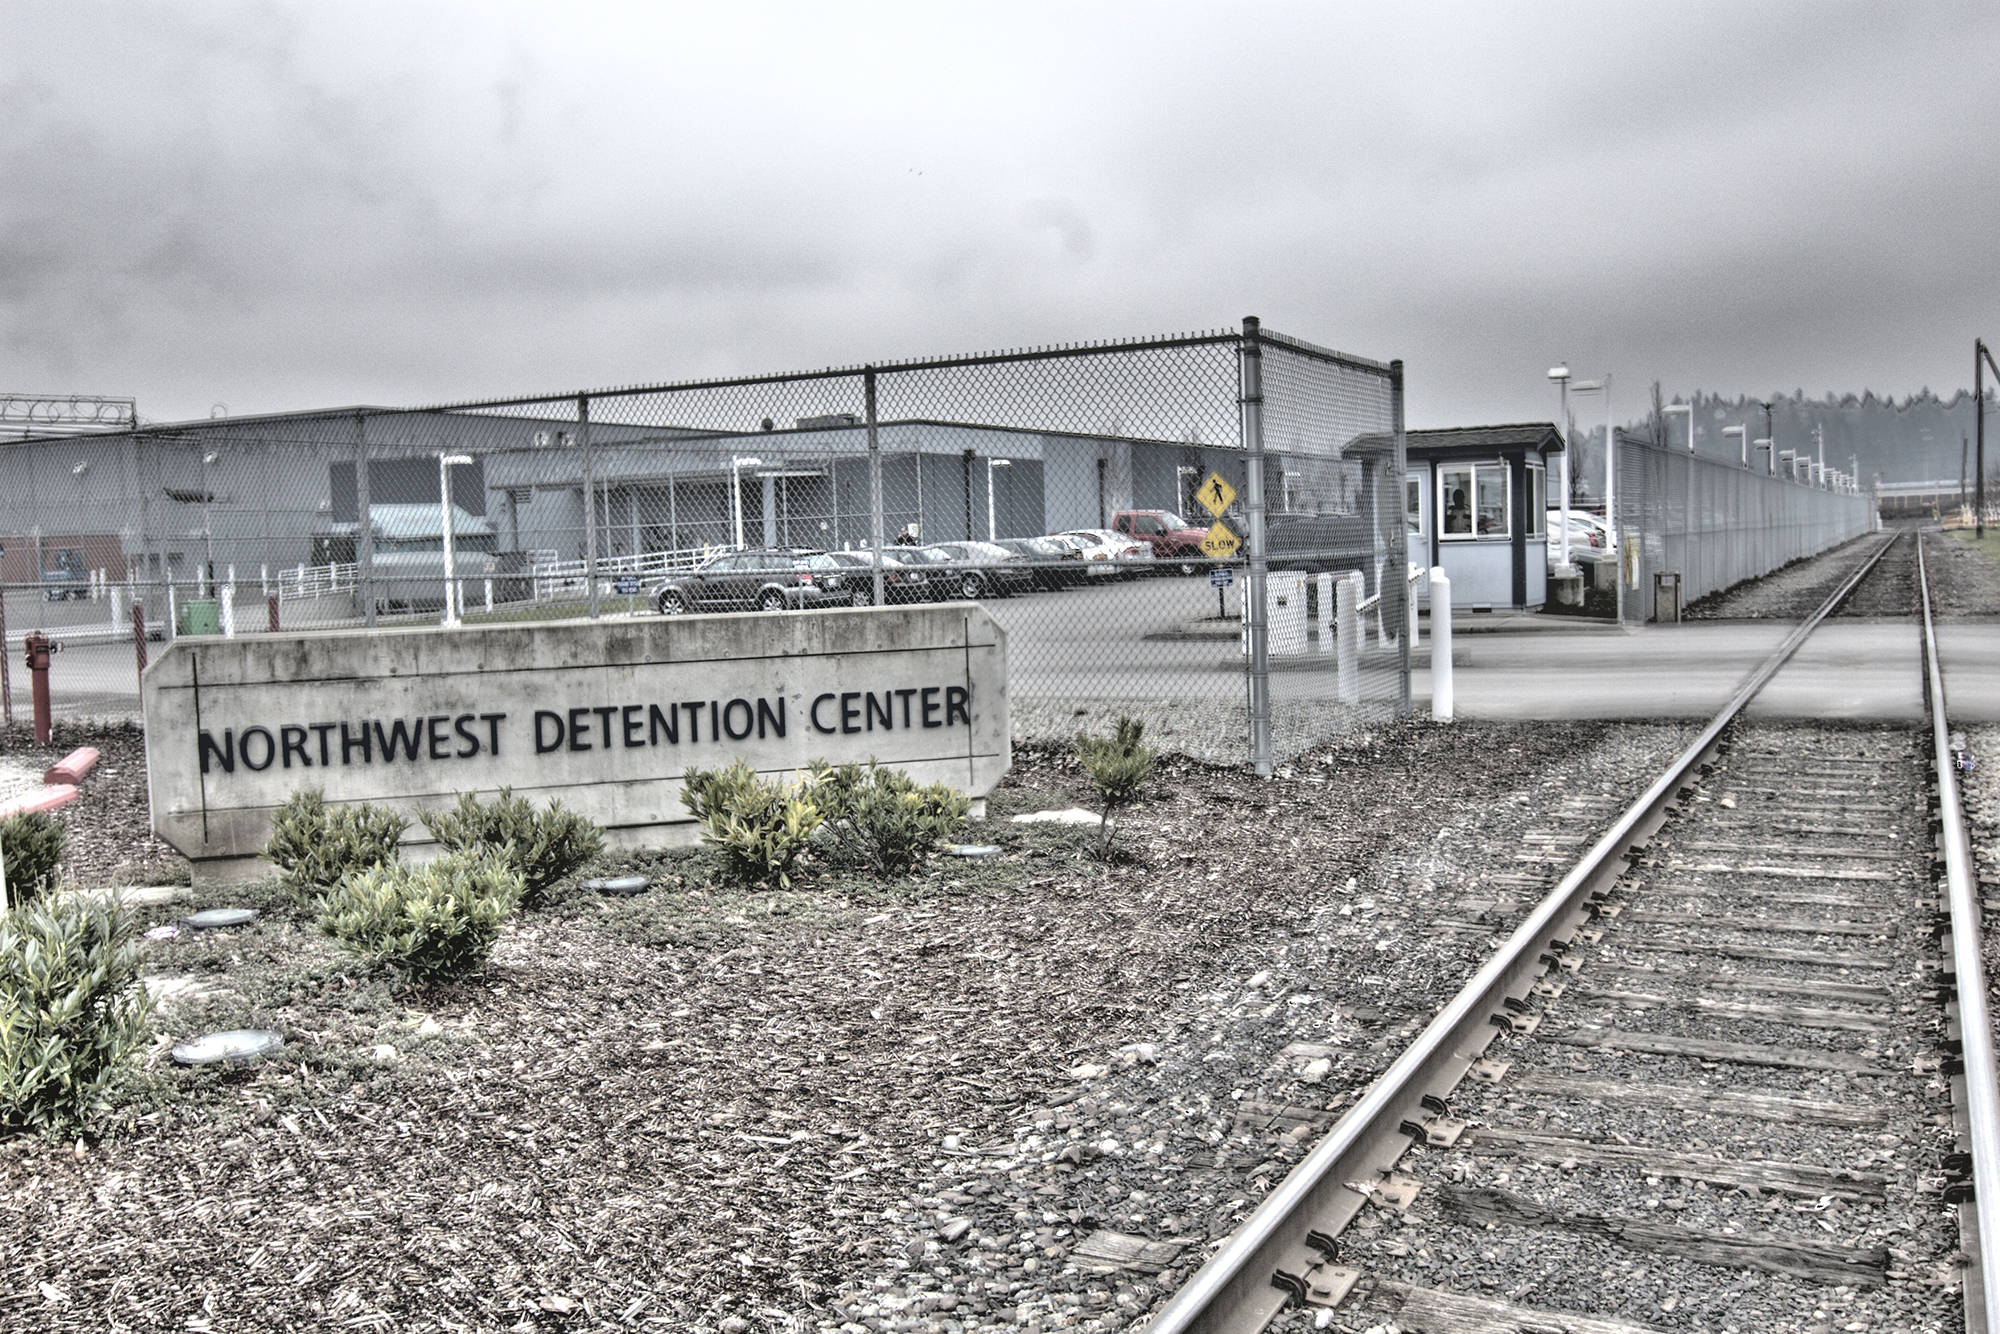 The Northwest Detention Center in Tacoma. Photo by the Globalist via Flickr